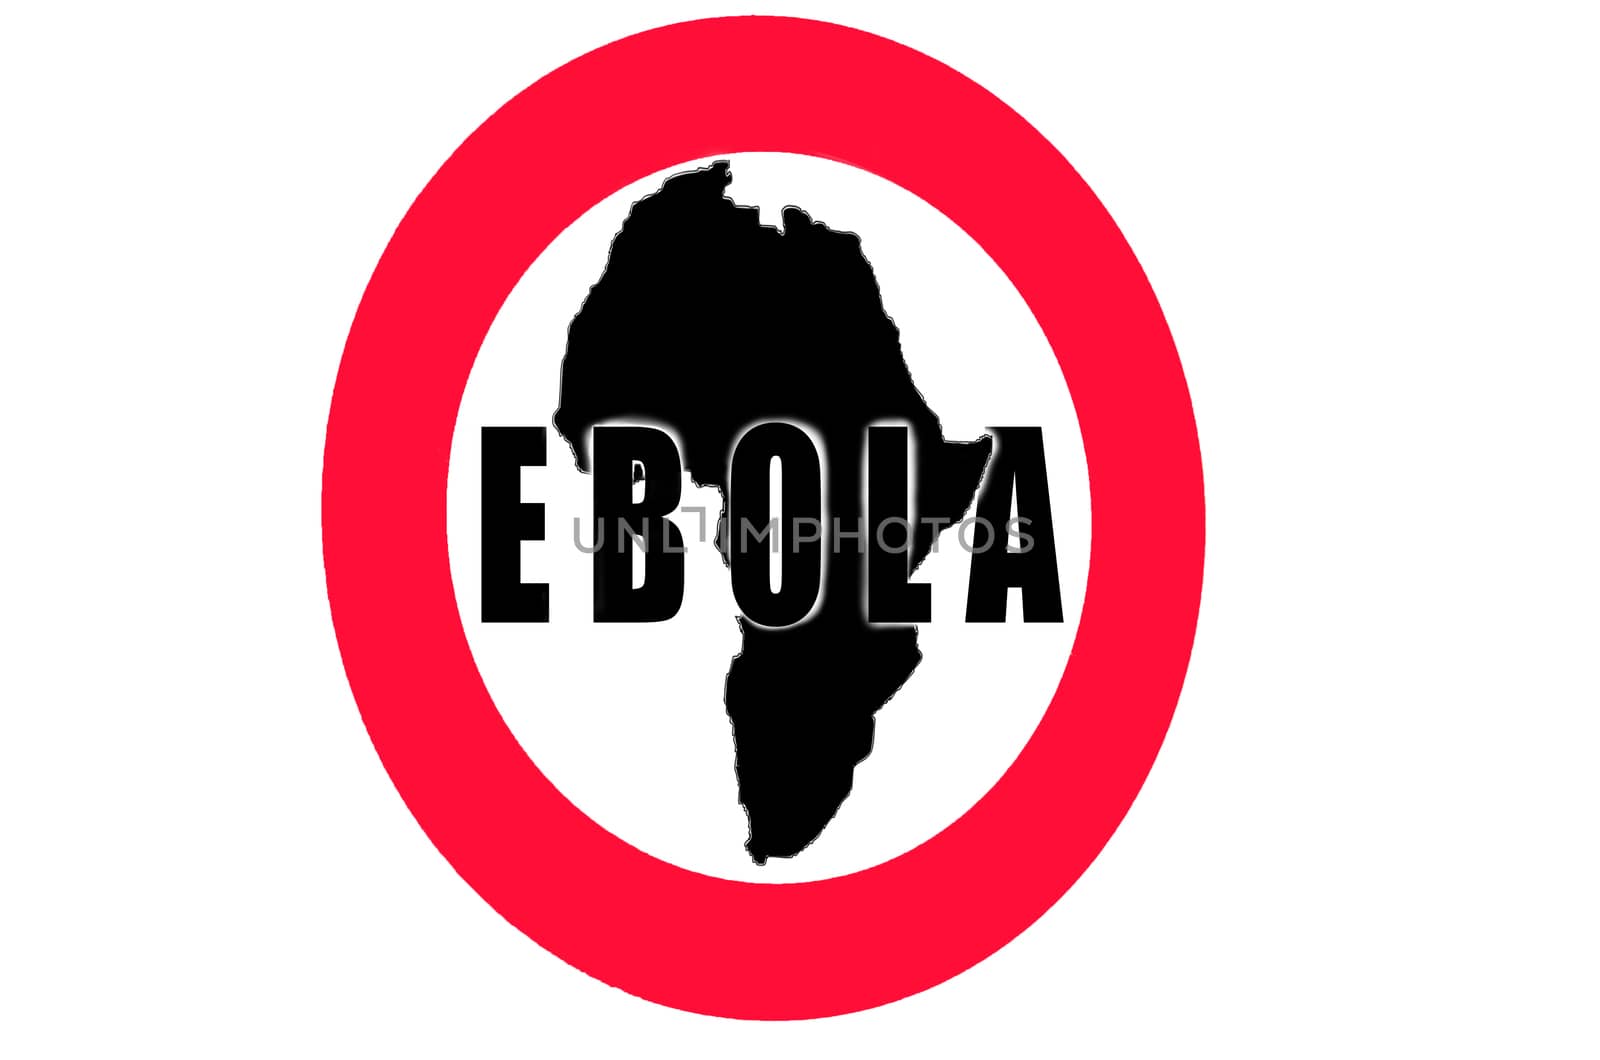 Round Warning Sign, Ebola outbreak in Africa.